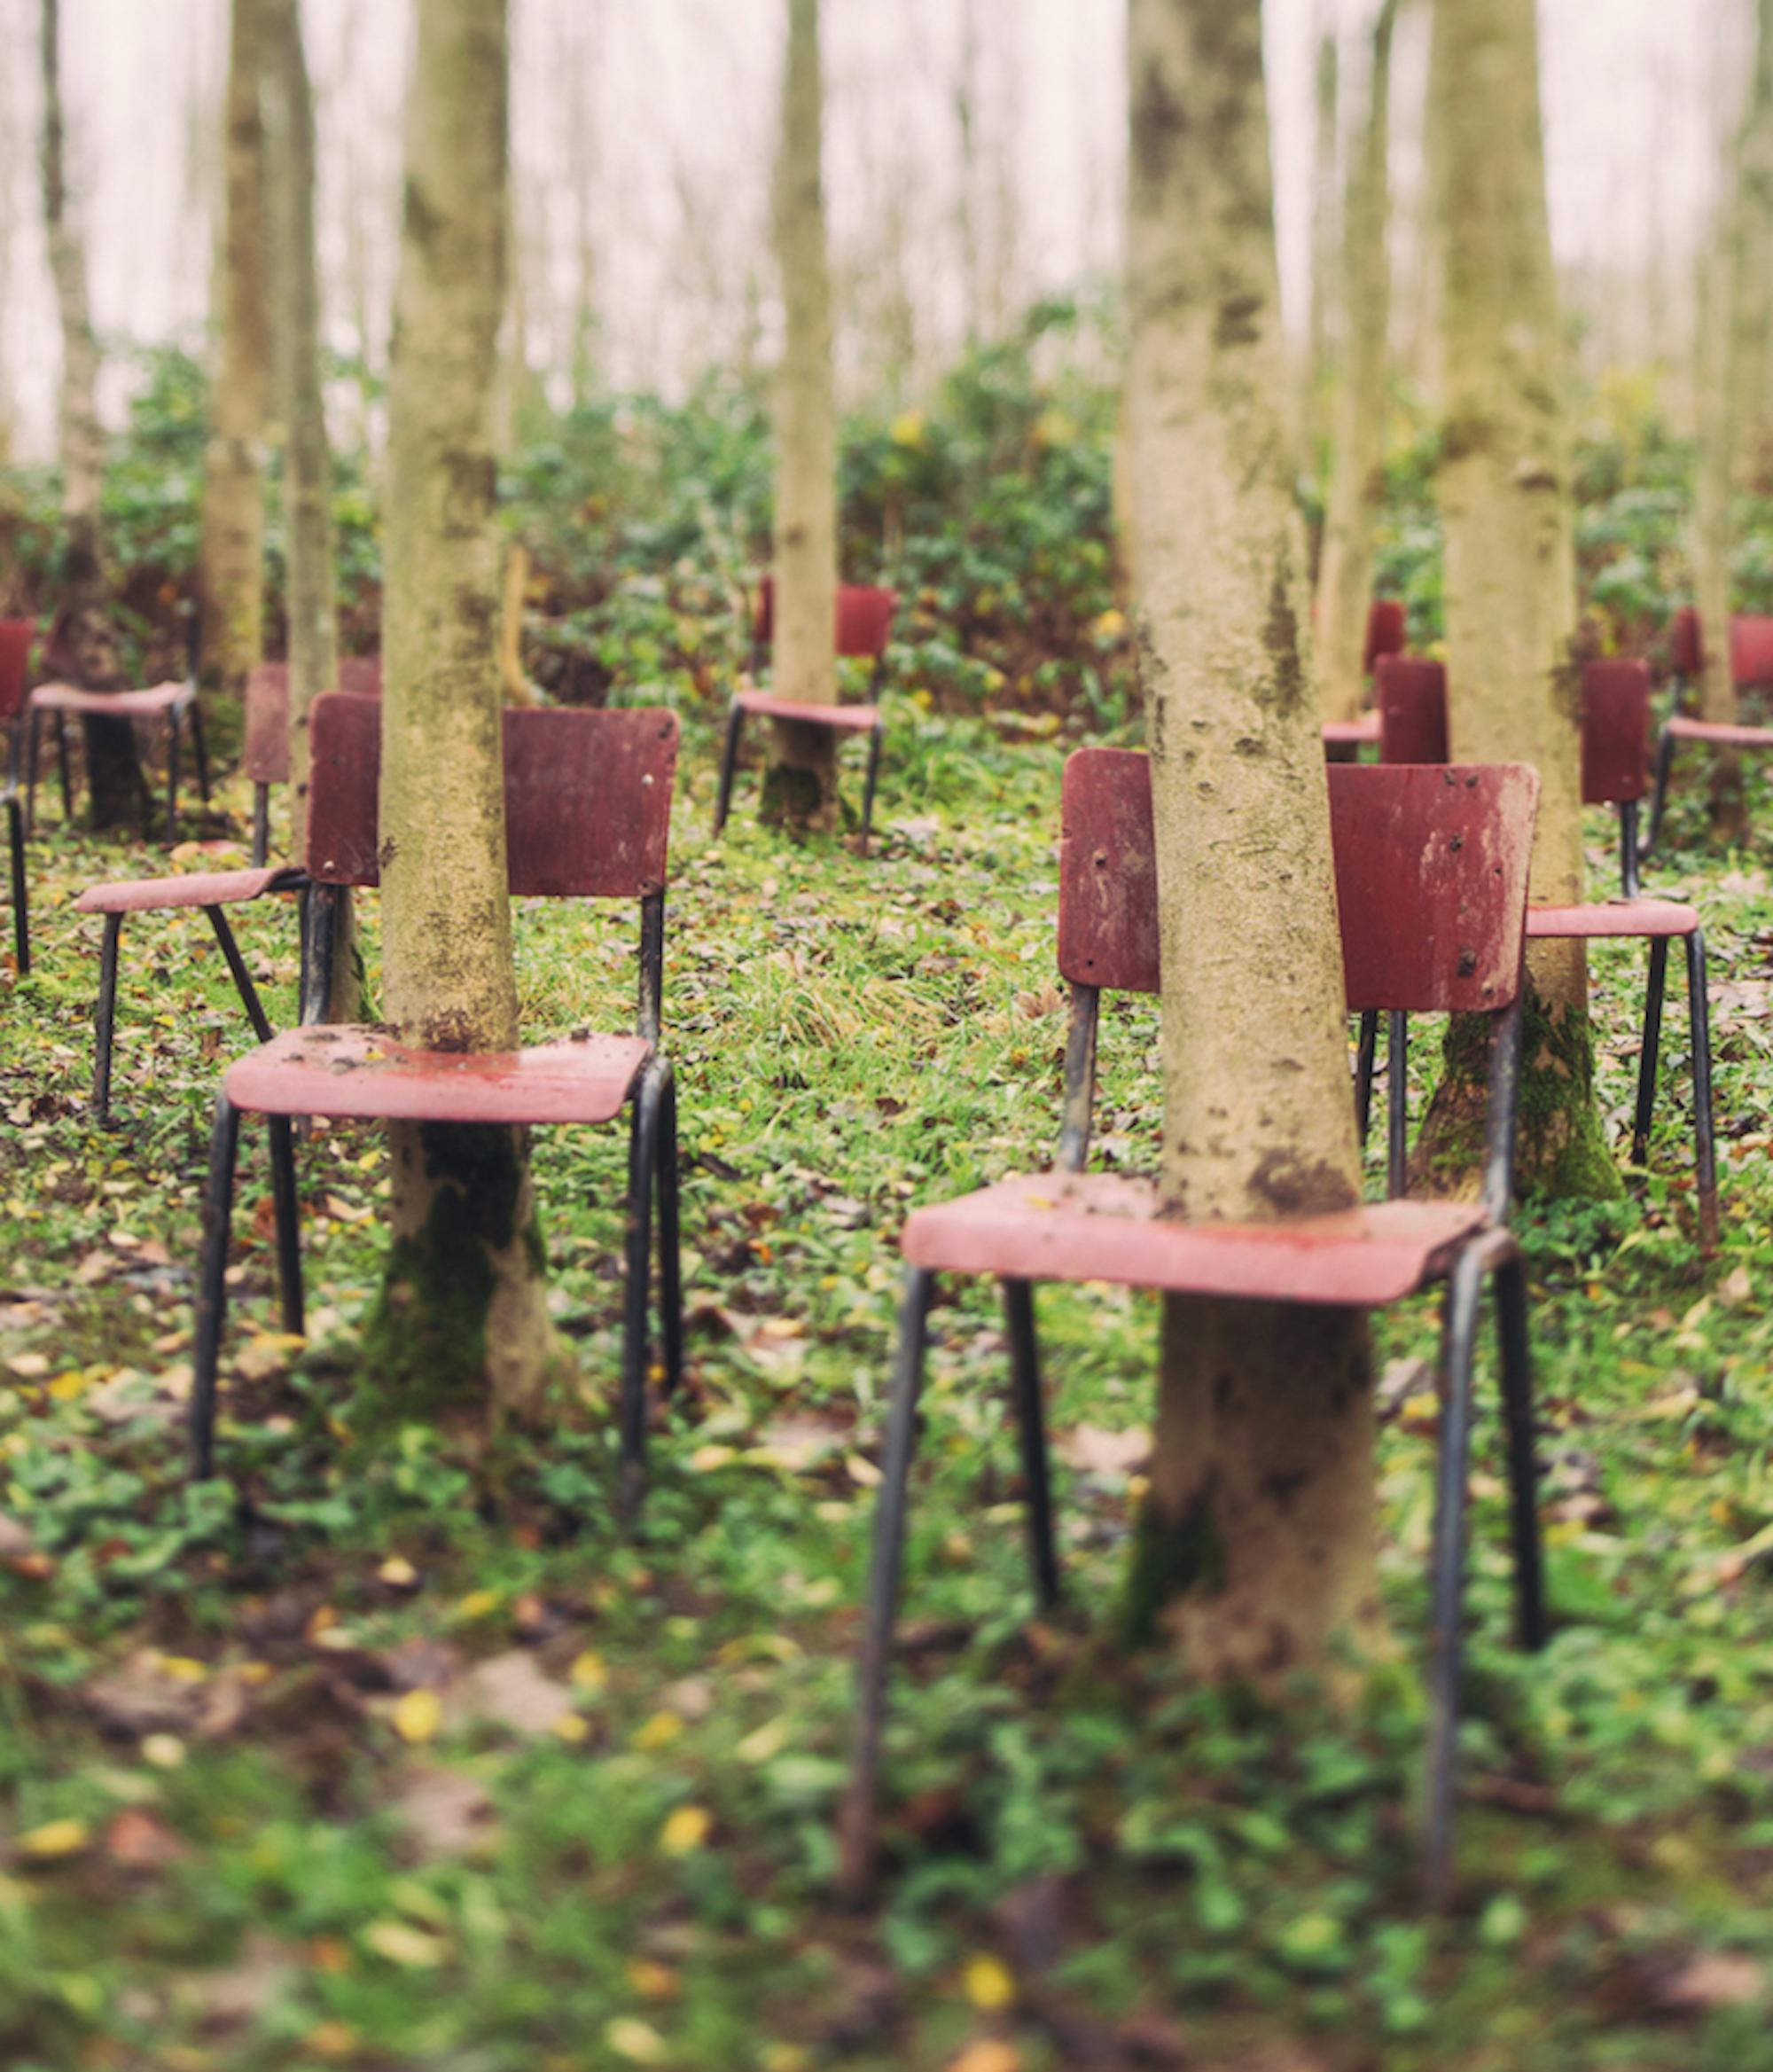 Orchestral by Gina Soden - Abandoned place, urbex photography, forest, chairs For Sale 3